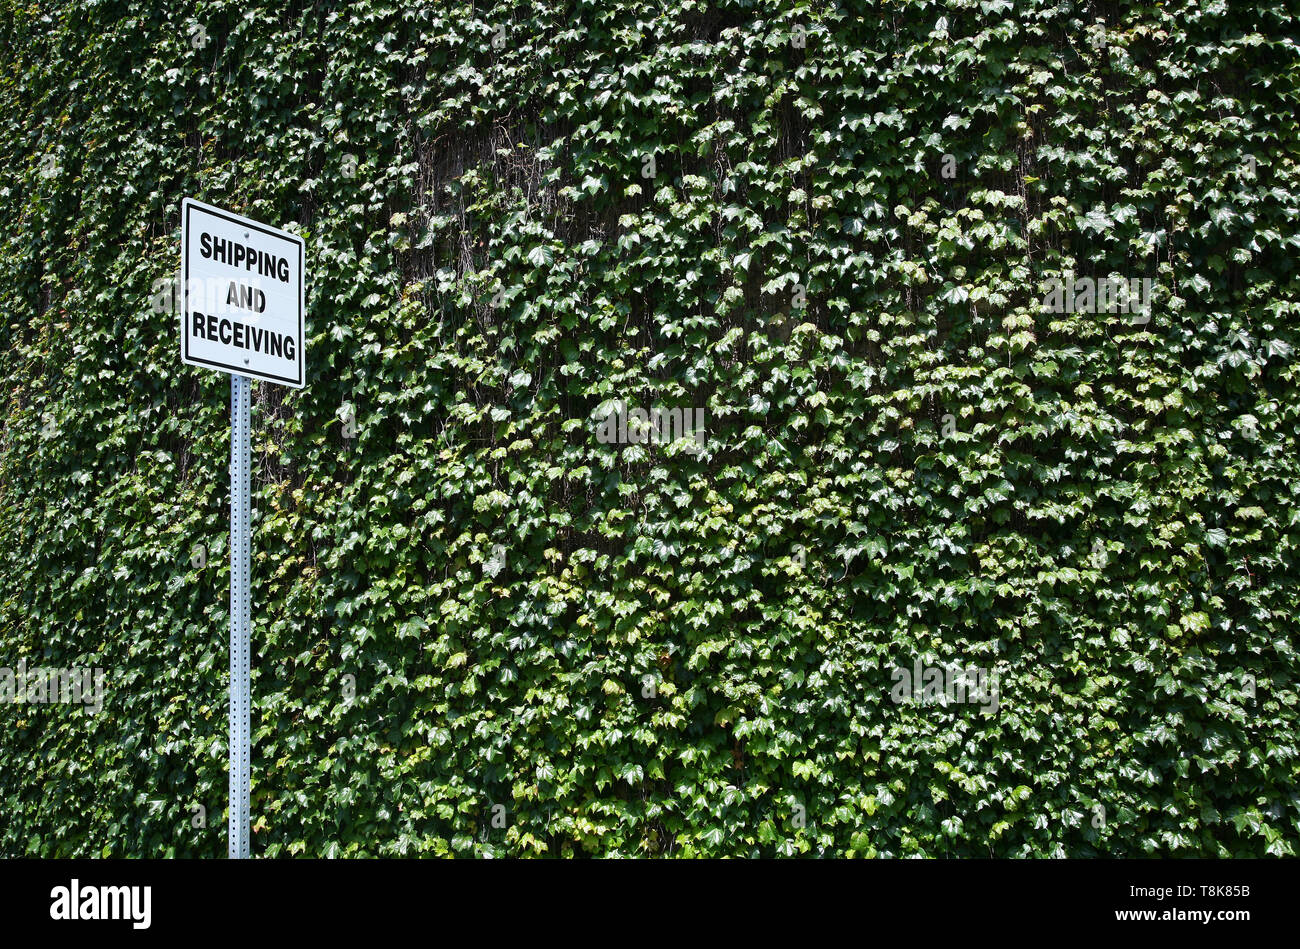 Shipping and receiving sign against wall of ivy Stock Photo